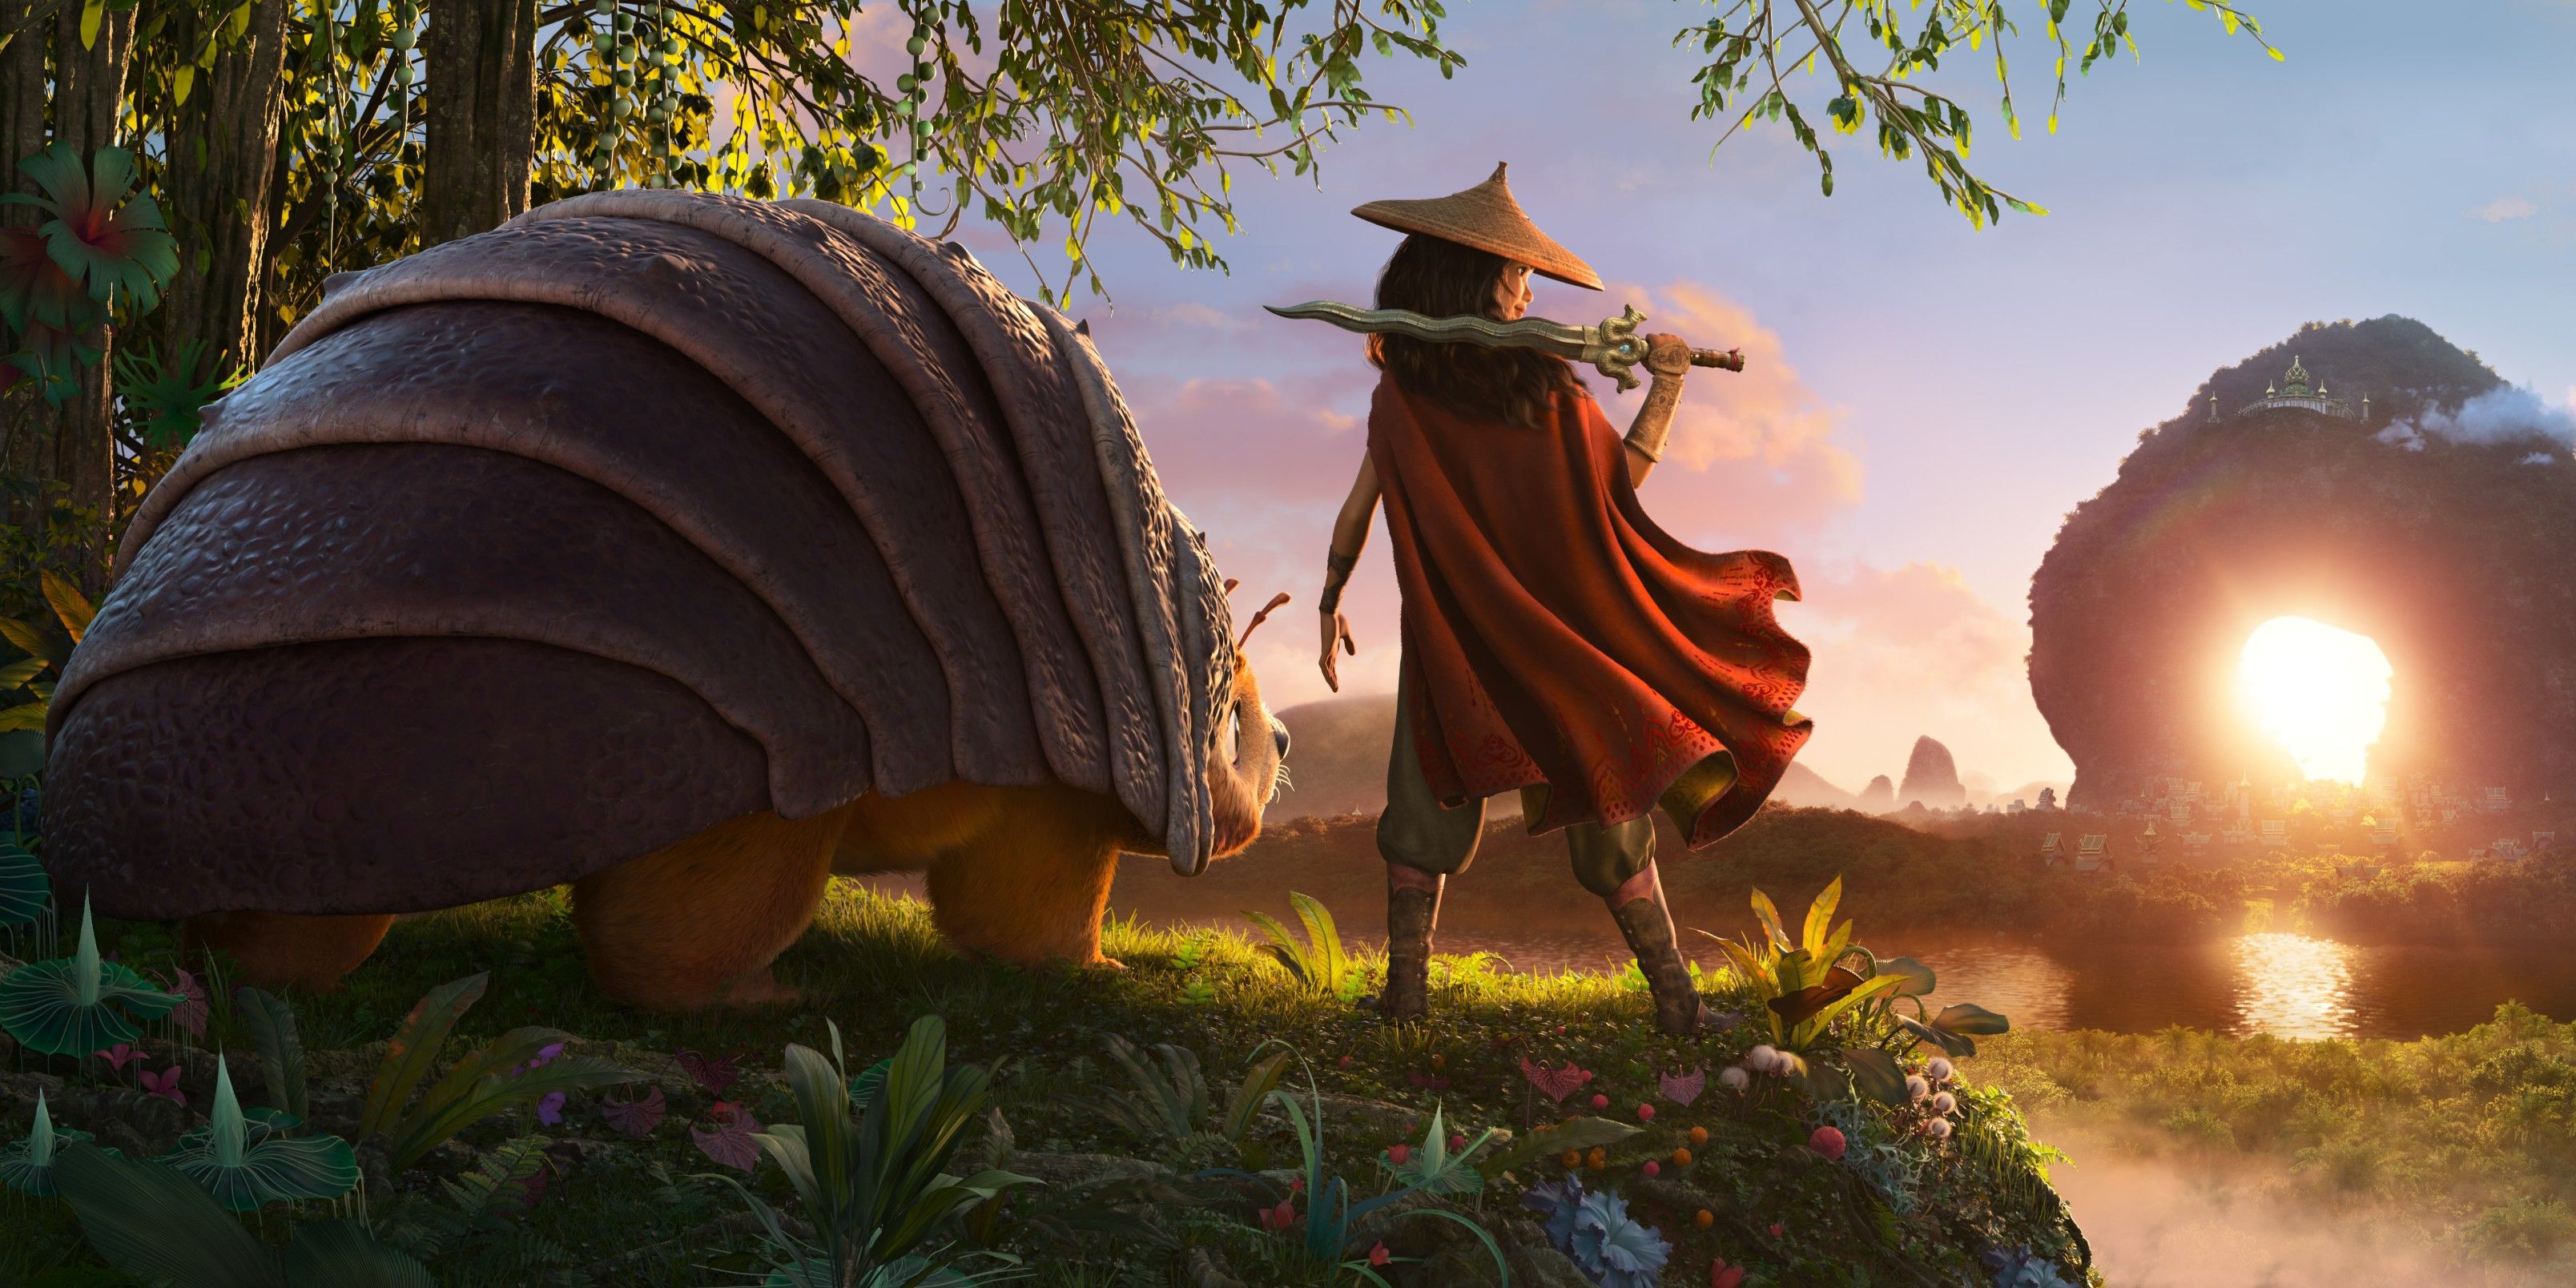 First look image from Disney's Raya and the Last Dragon